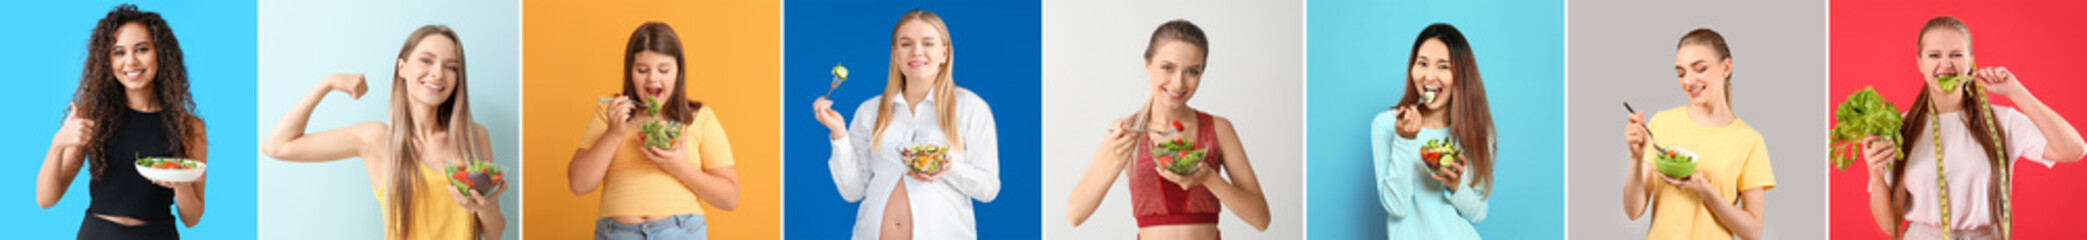 Collage of young women and girl with healthy vegetable salads on color background